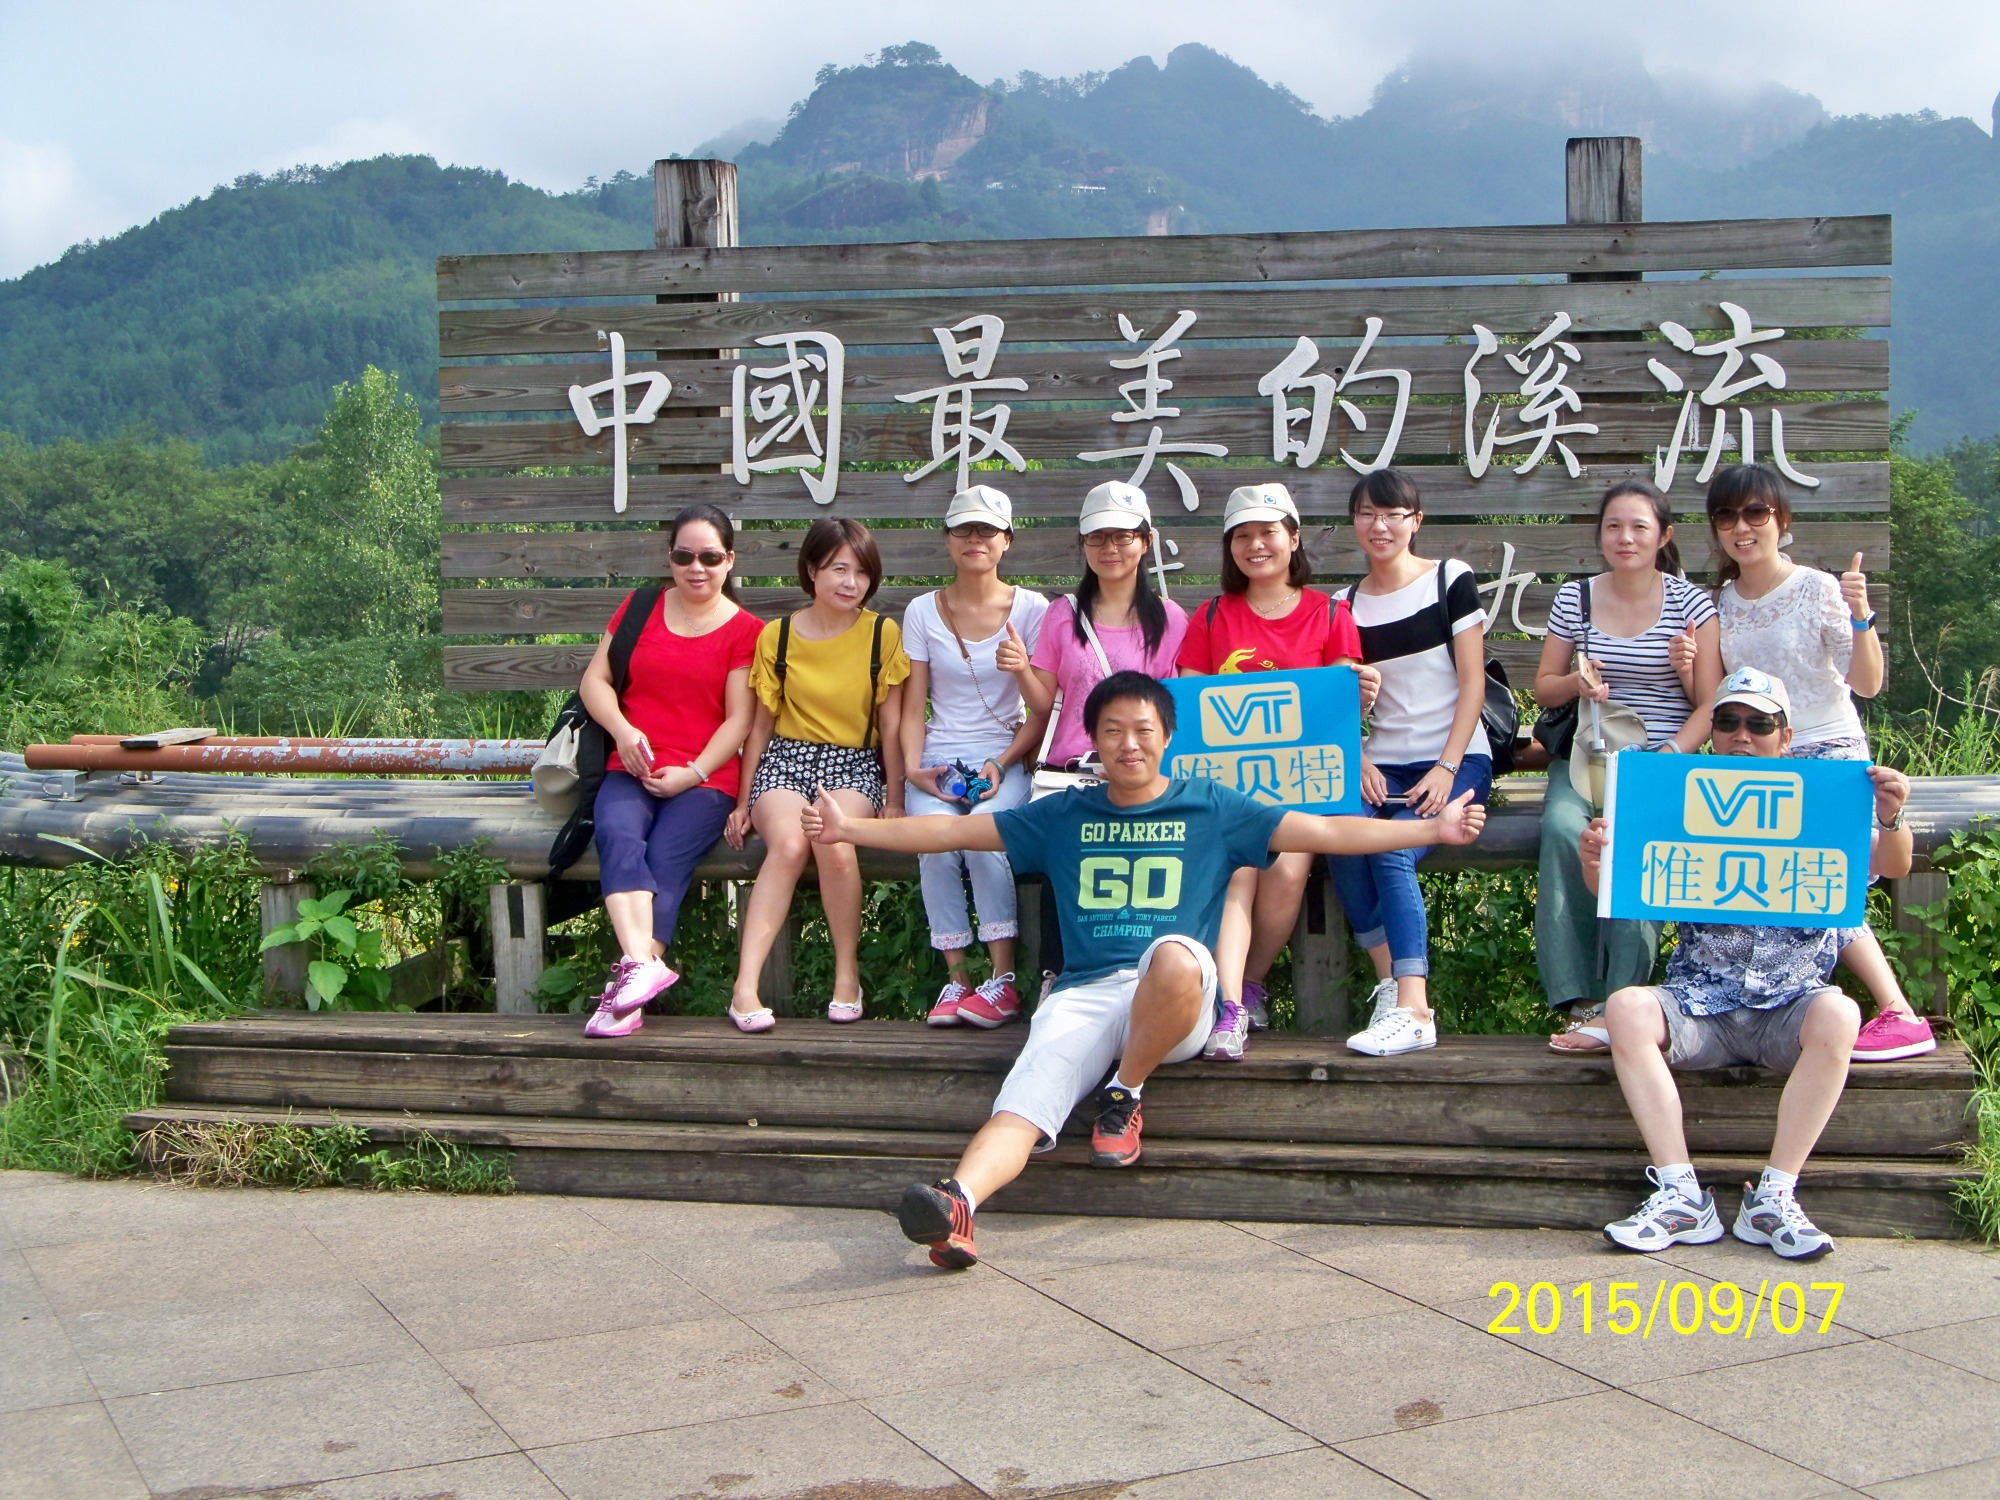 VBeT organized the team activity in Fujian Mt Wuyi in 2015